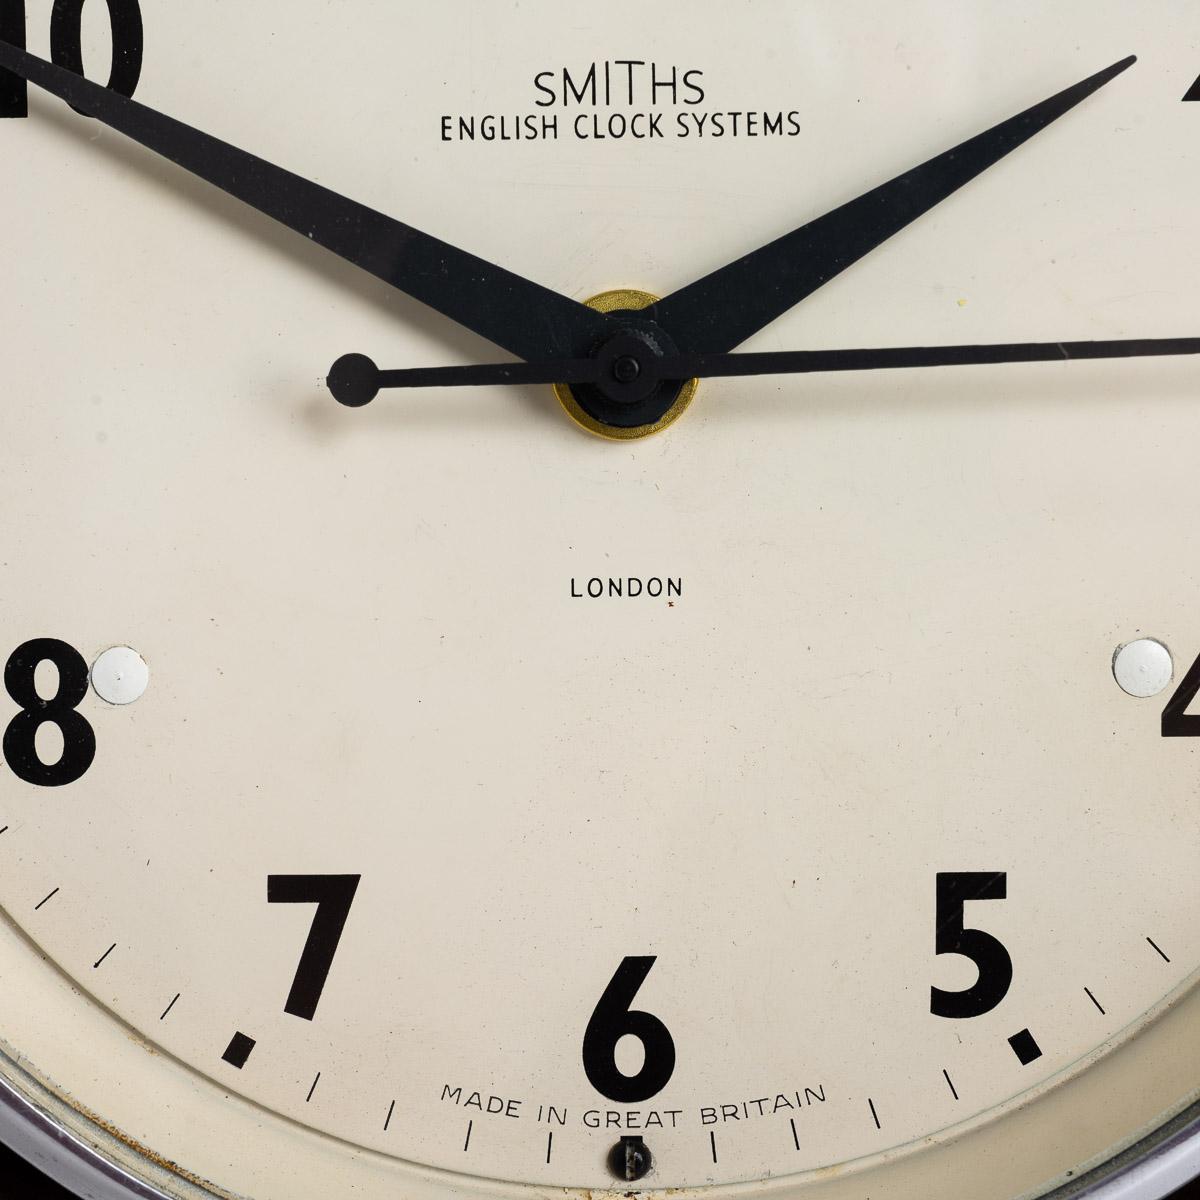 Industrial Small Antique Bakelite Factory Clocks by Smiths English Clock Systems - 1 